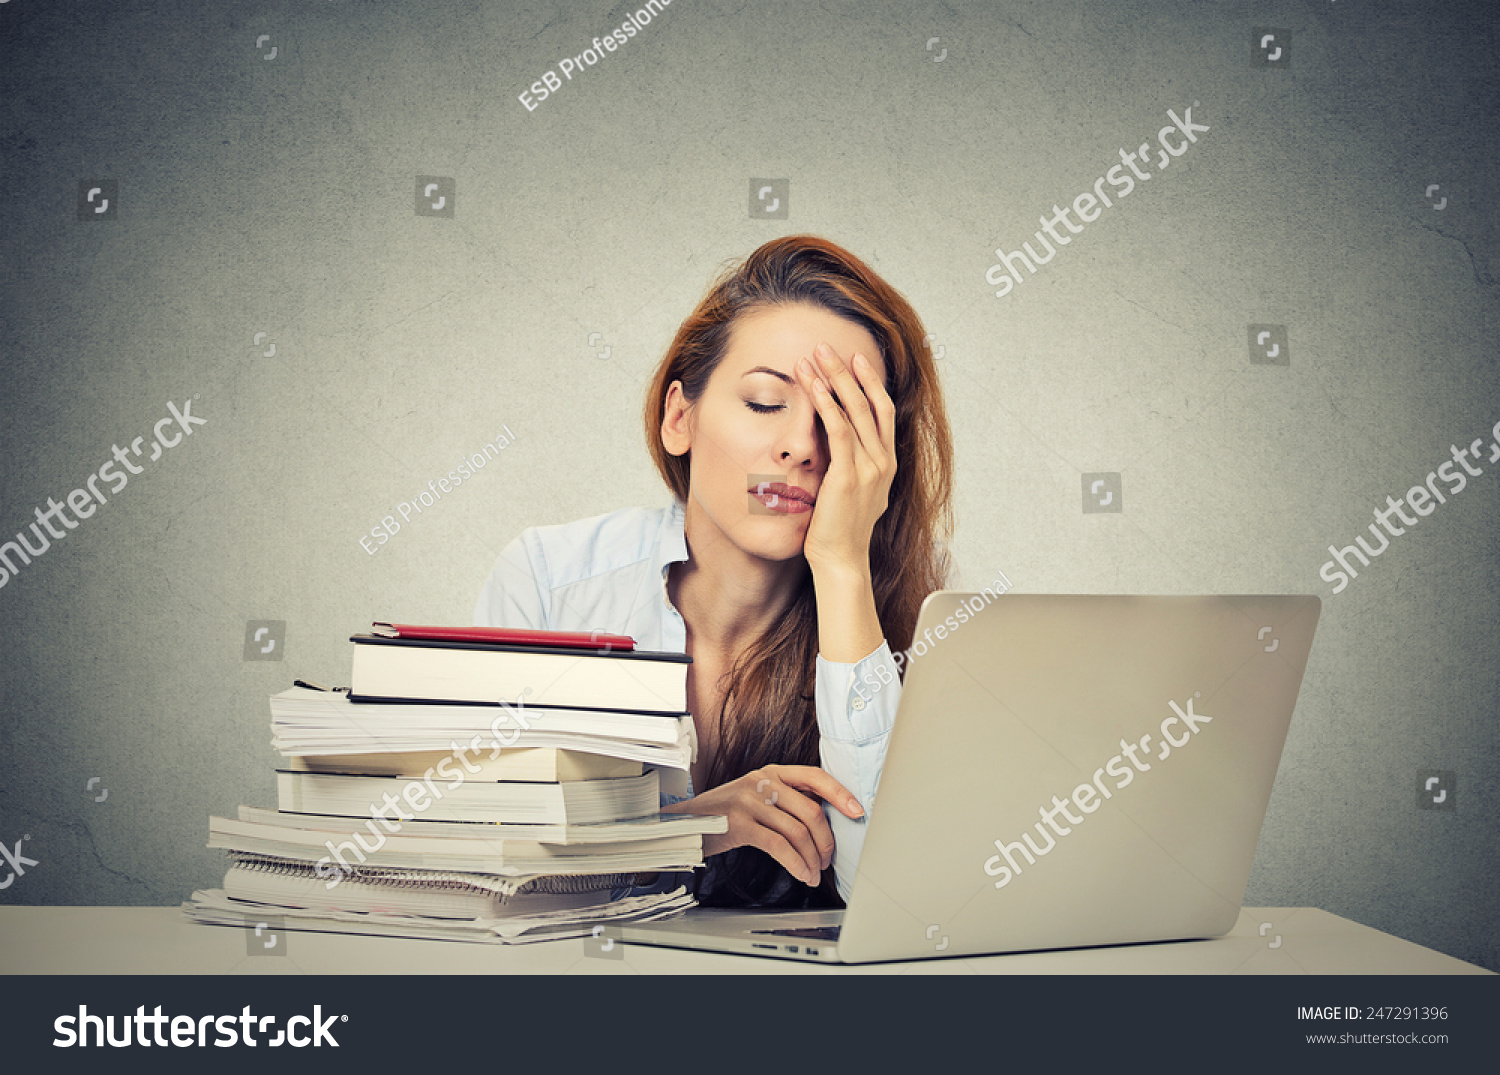 Too much work tired sleepy young woman sitting at her desk with books in front of laptop computer isolated grey wall office background. Busy schedule in college, workplace, sleep deprivation concept #247291396